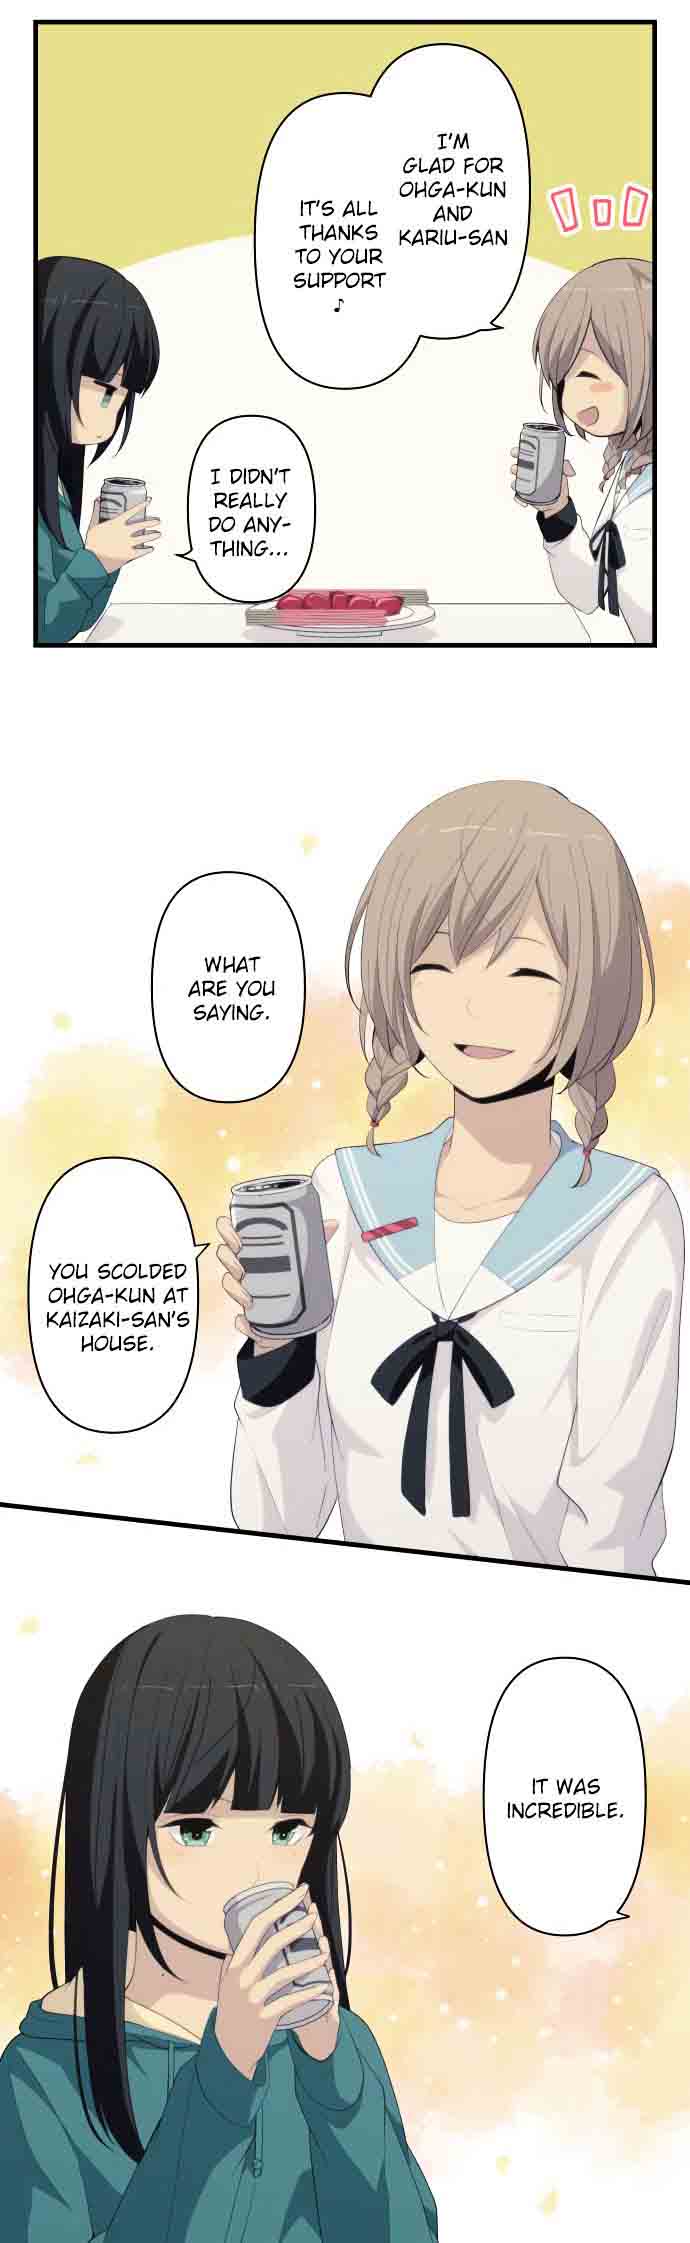 relife_180_2